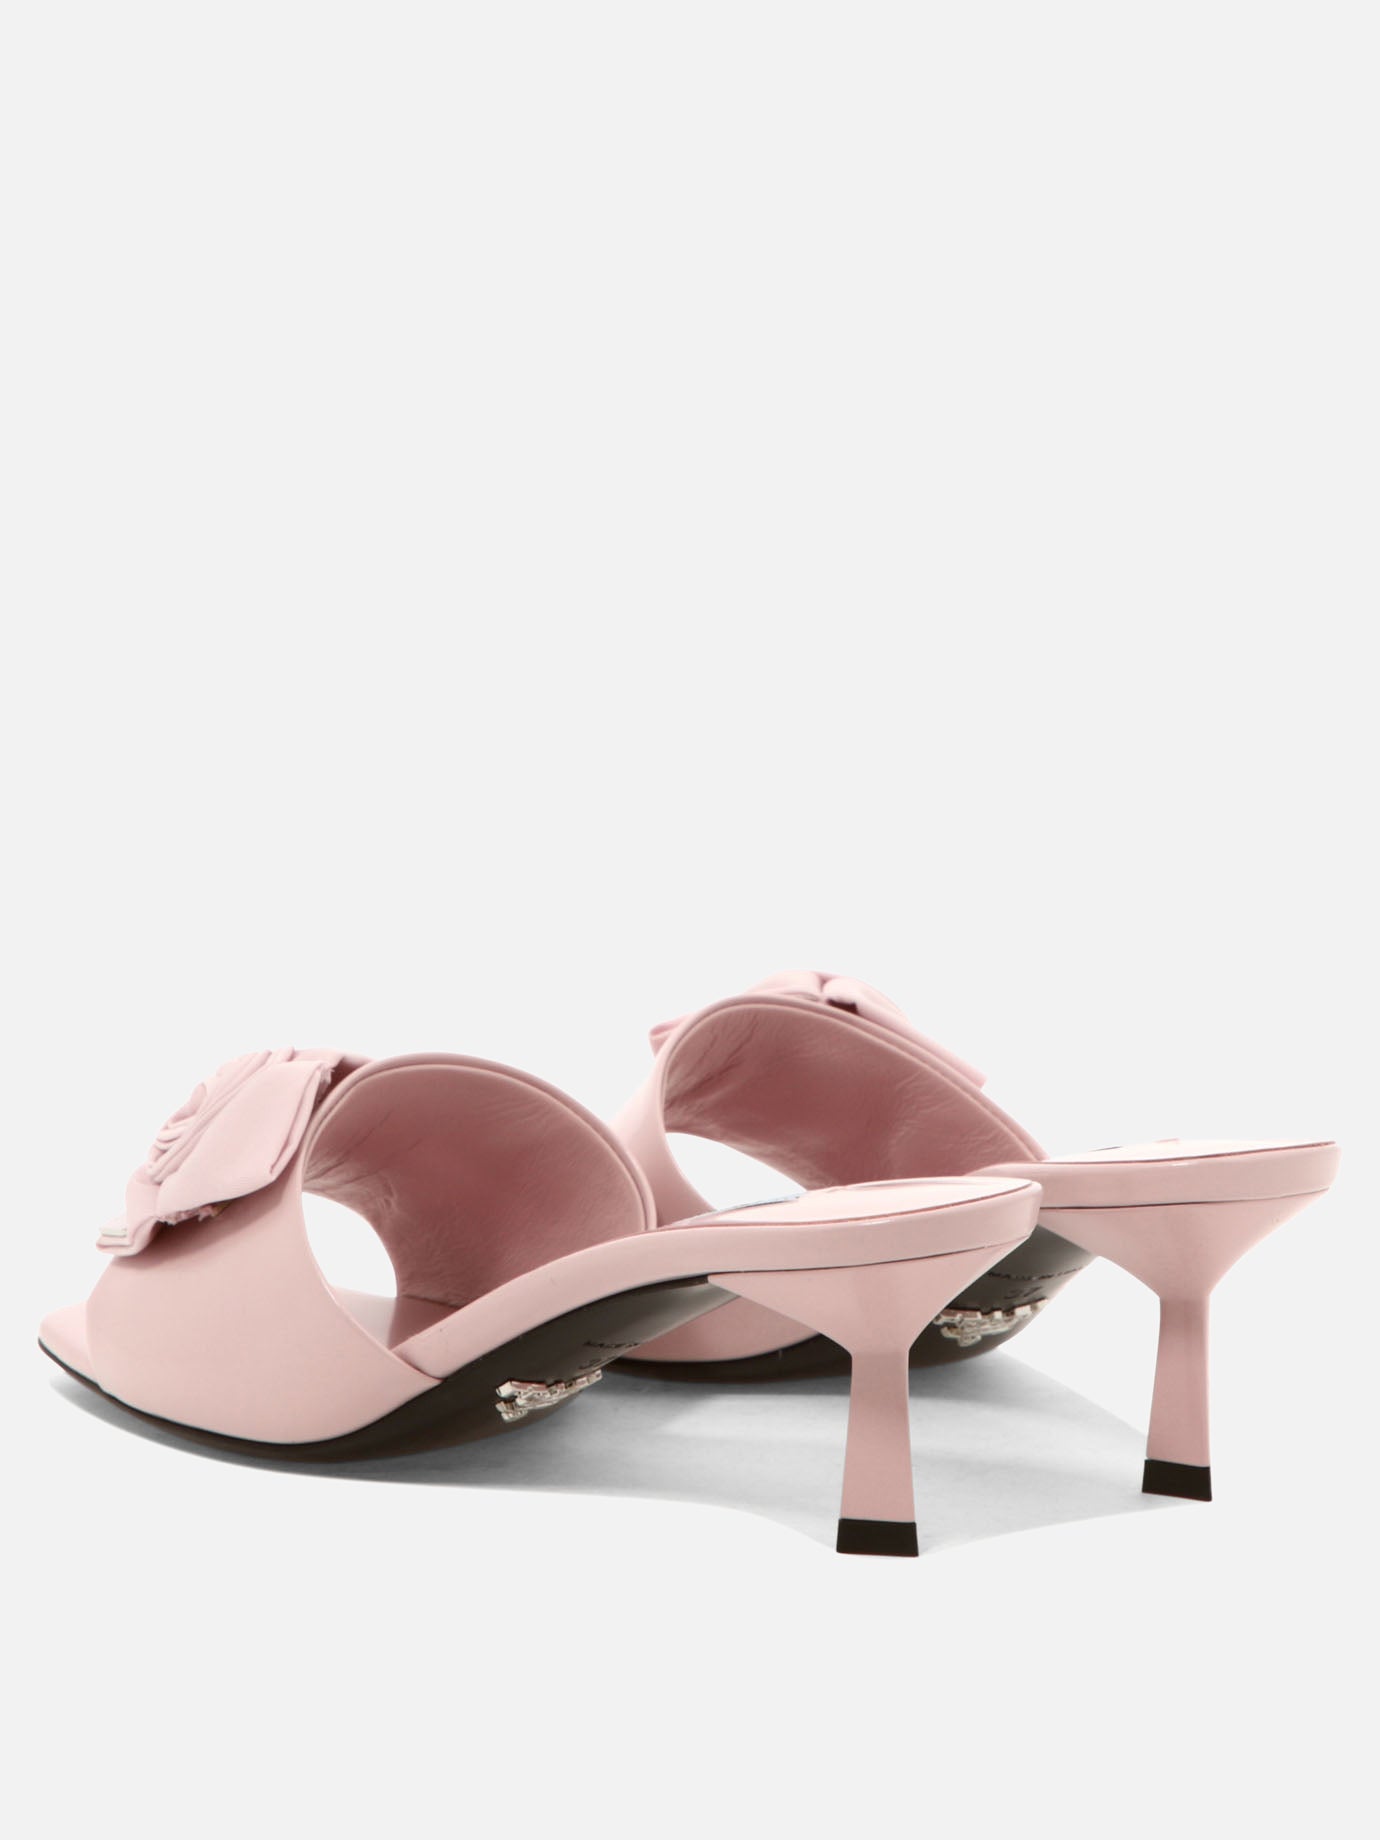 Sandals with applied rose